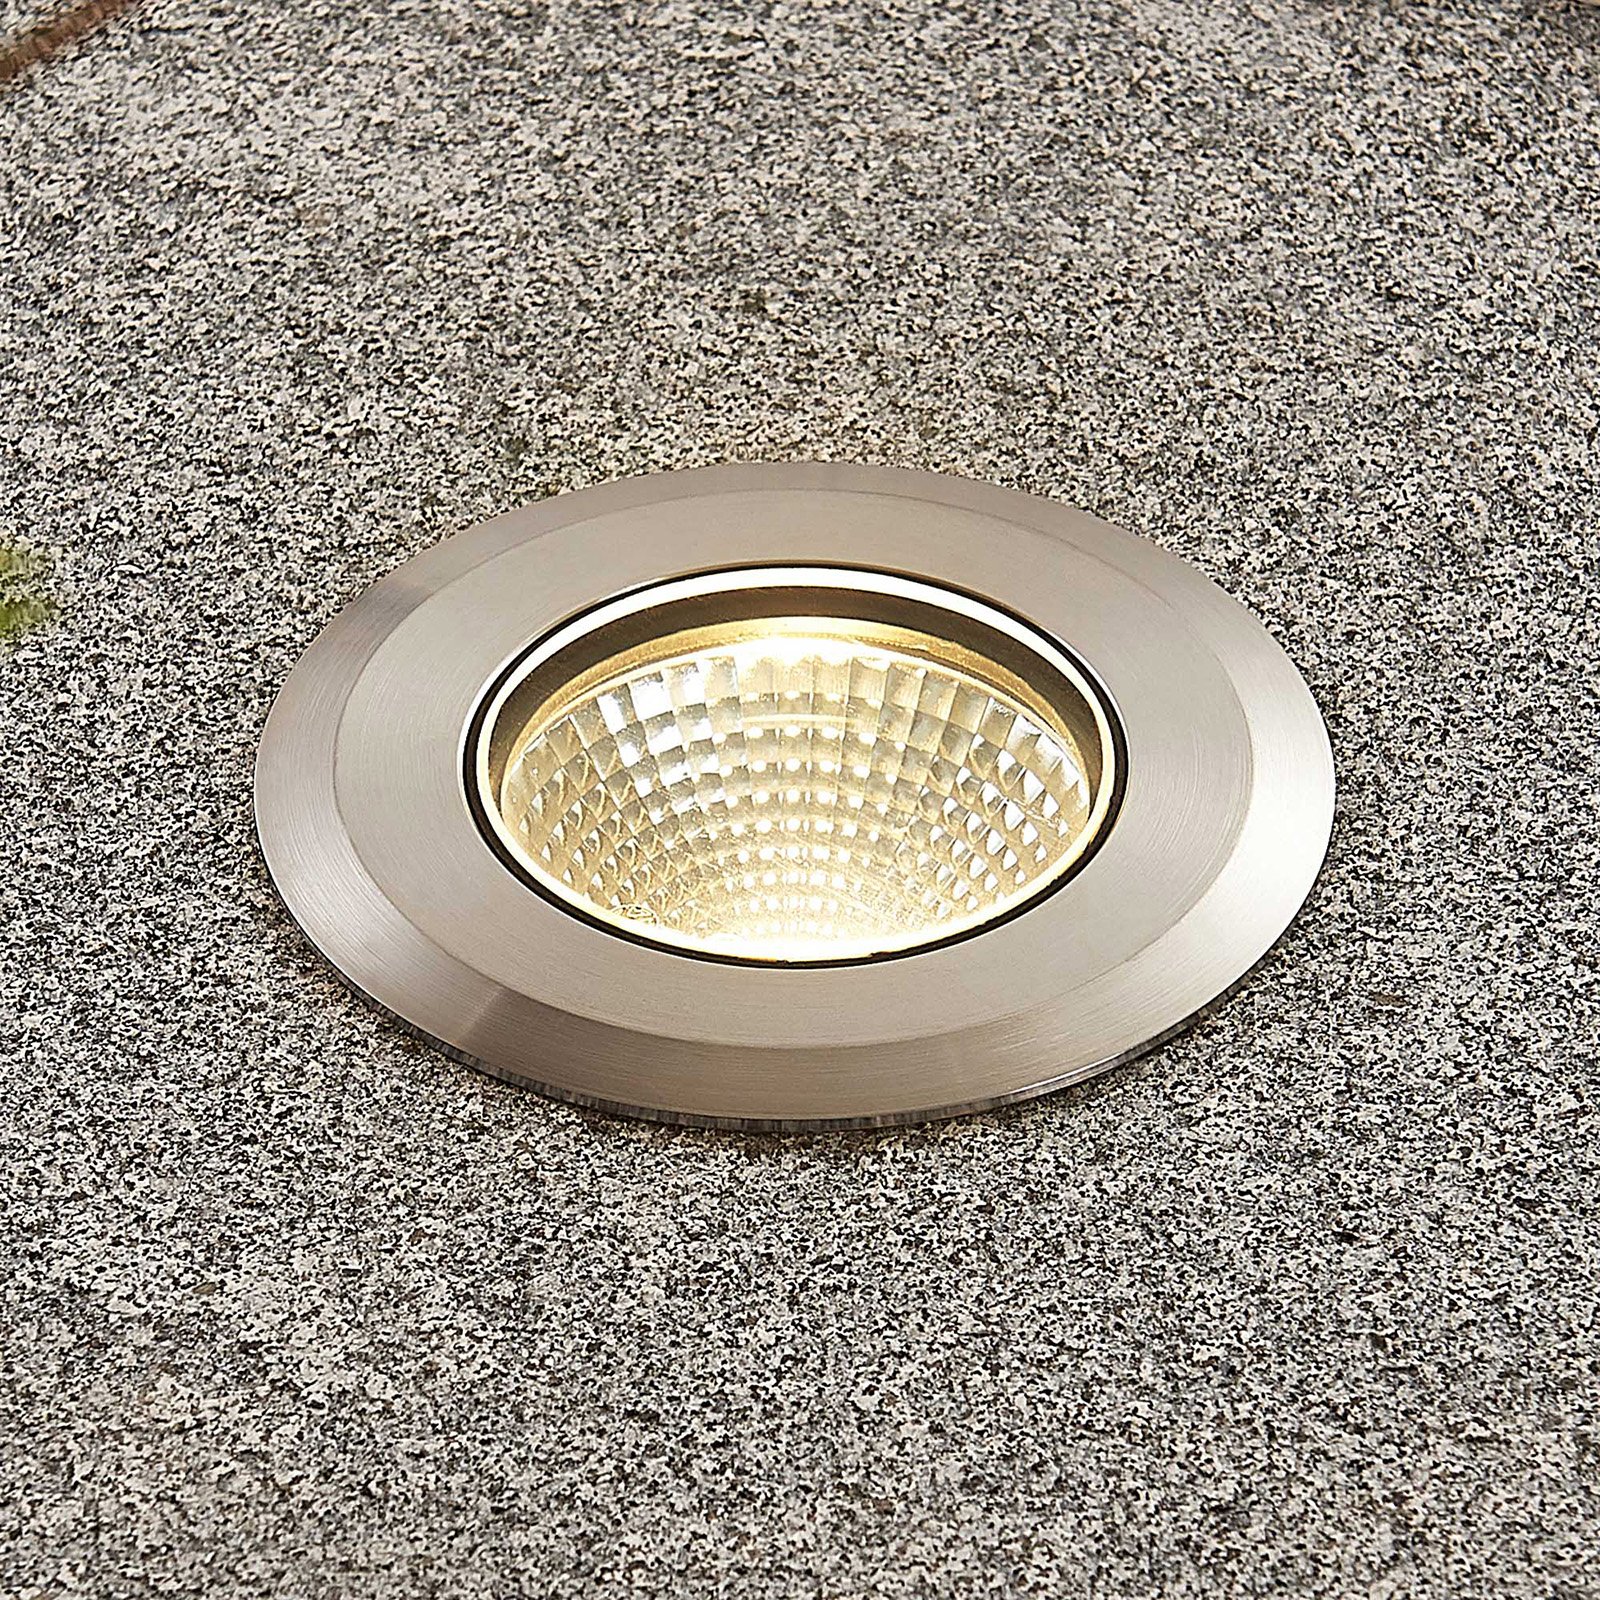 Sulea LED stainless steel deck light IP67 round